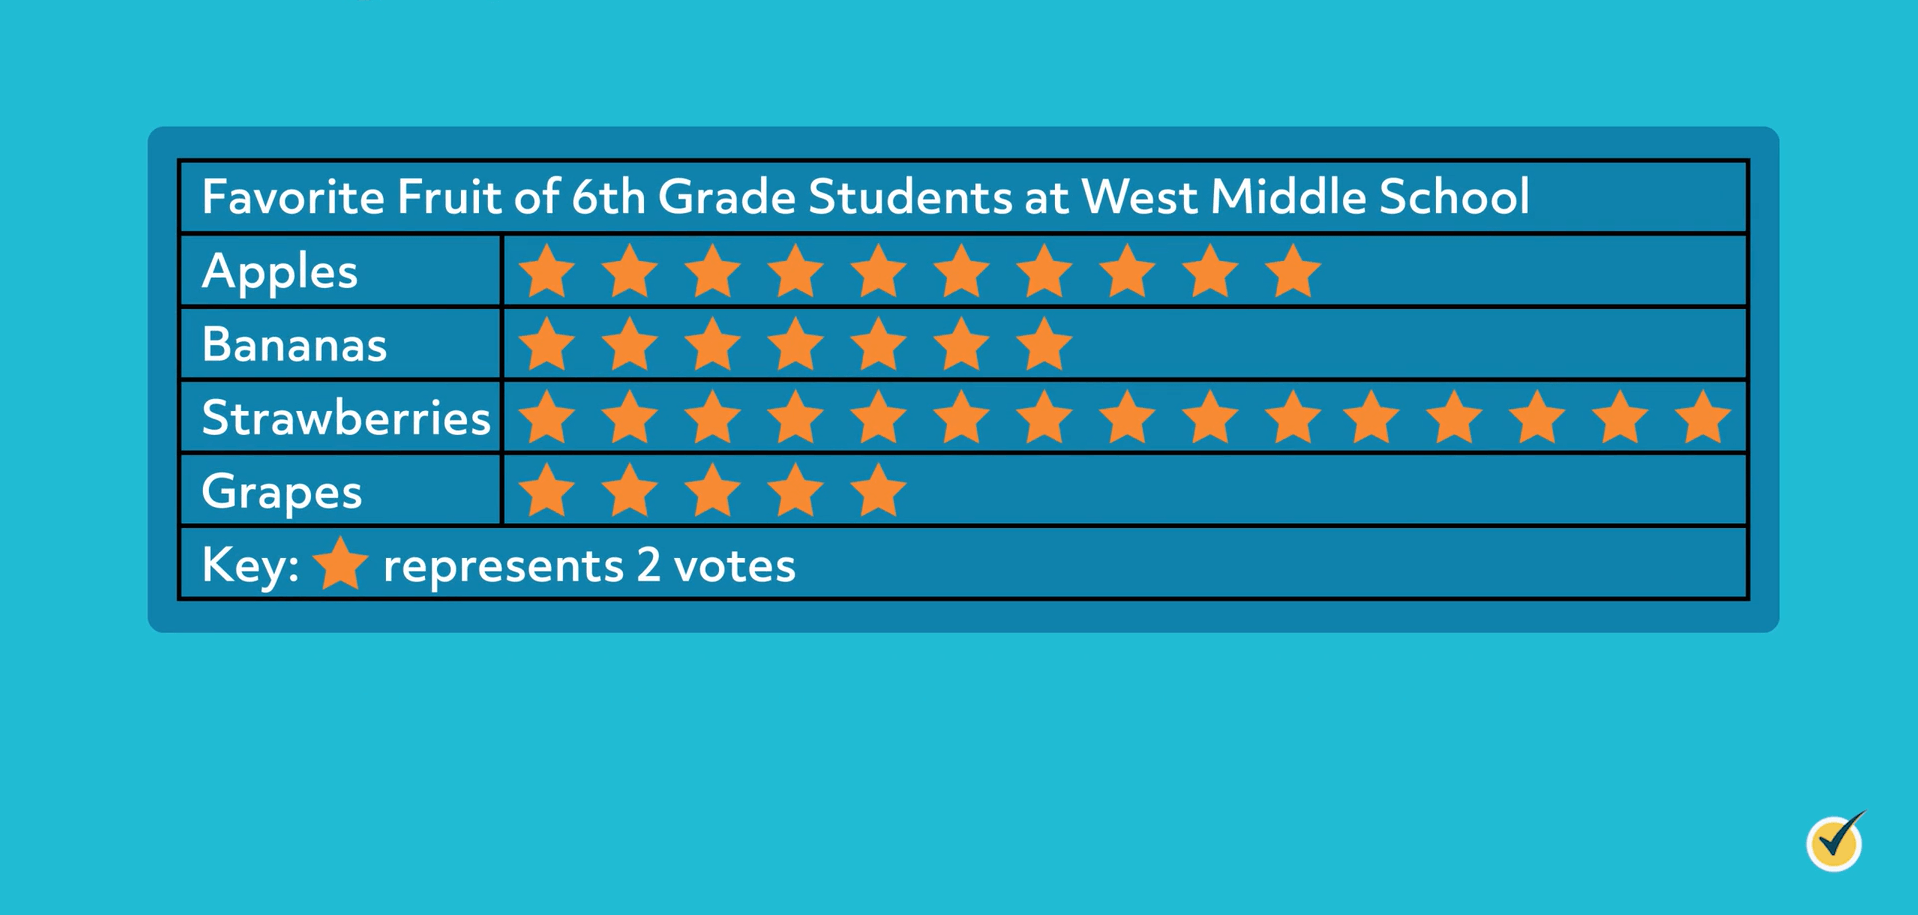 Pictograph of favorite fruit of 6th grade students at West Middle School. Strawberries have 15 stars, apples have 11, Bananas have 7, and Grapes have 5.